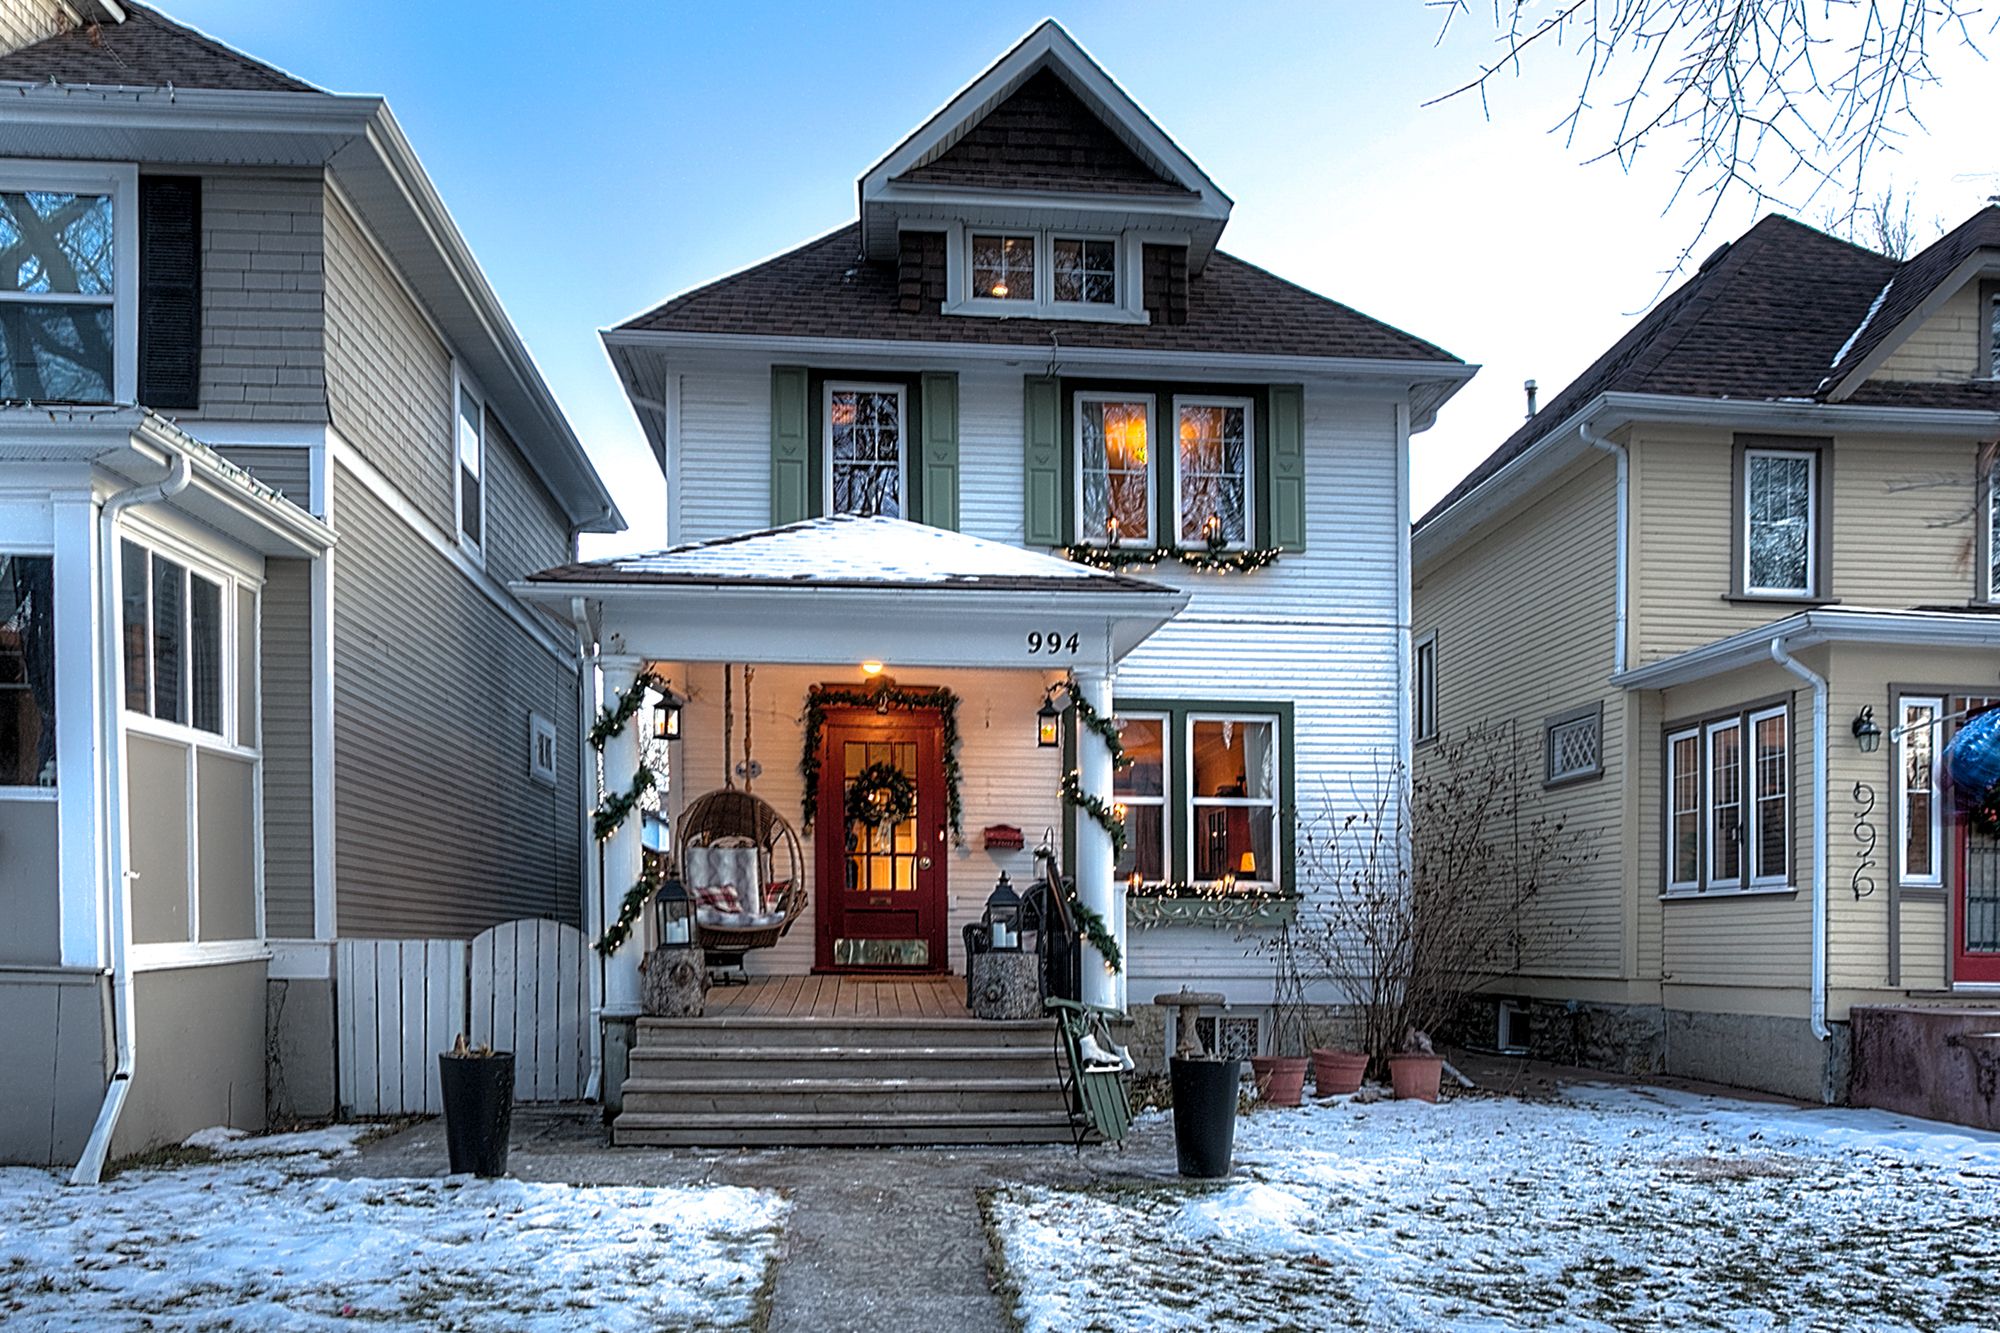 Main Photo: 994 Jessie Avenue in Winnipeg: Crescentwood Single Family Detached for sale (1Bw)  : MLS®# 1932364